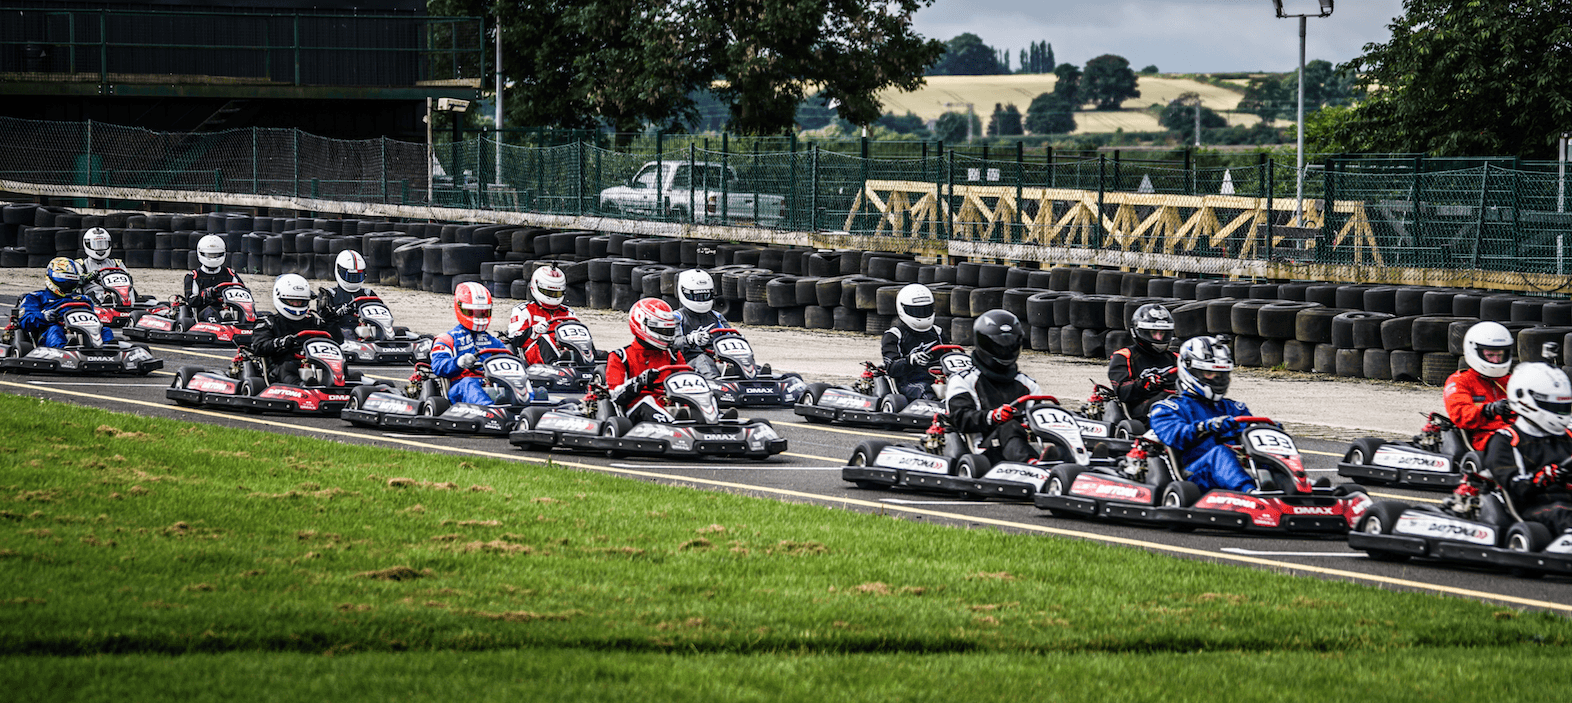 THE UK’S FASTEST CHAMPIONSHIP HEADS TO WHILTON MILL